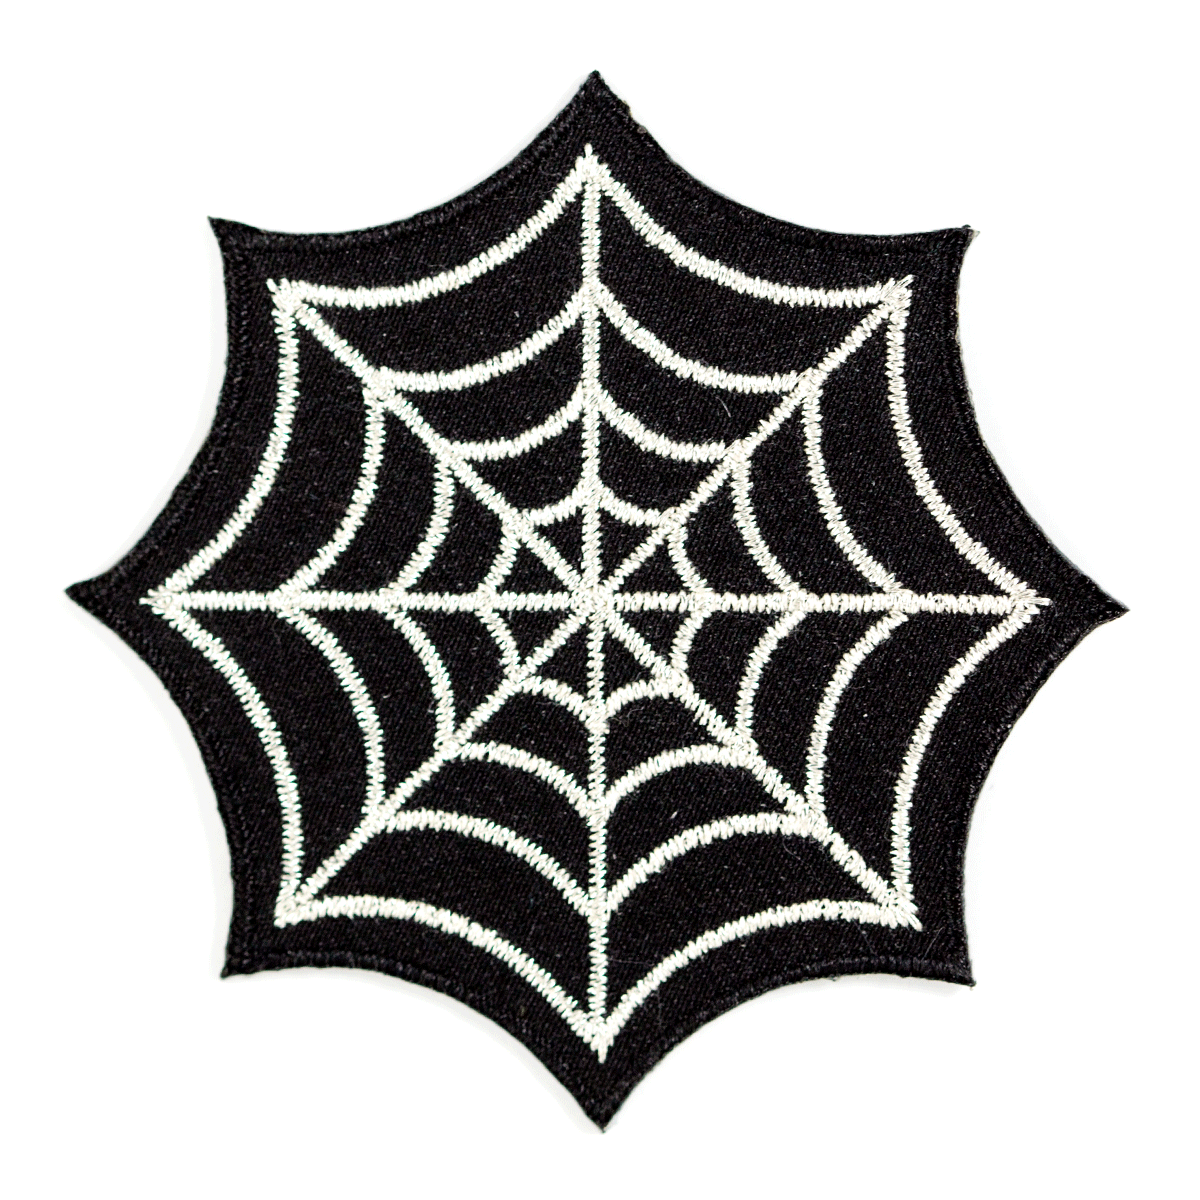 Black with white stitching spiderweb embroidered patch